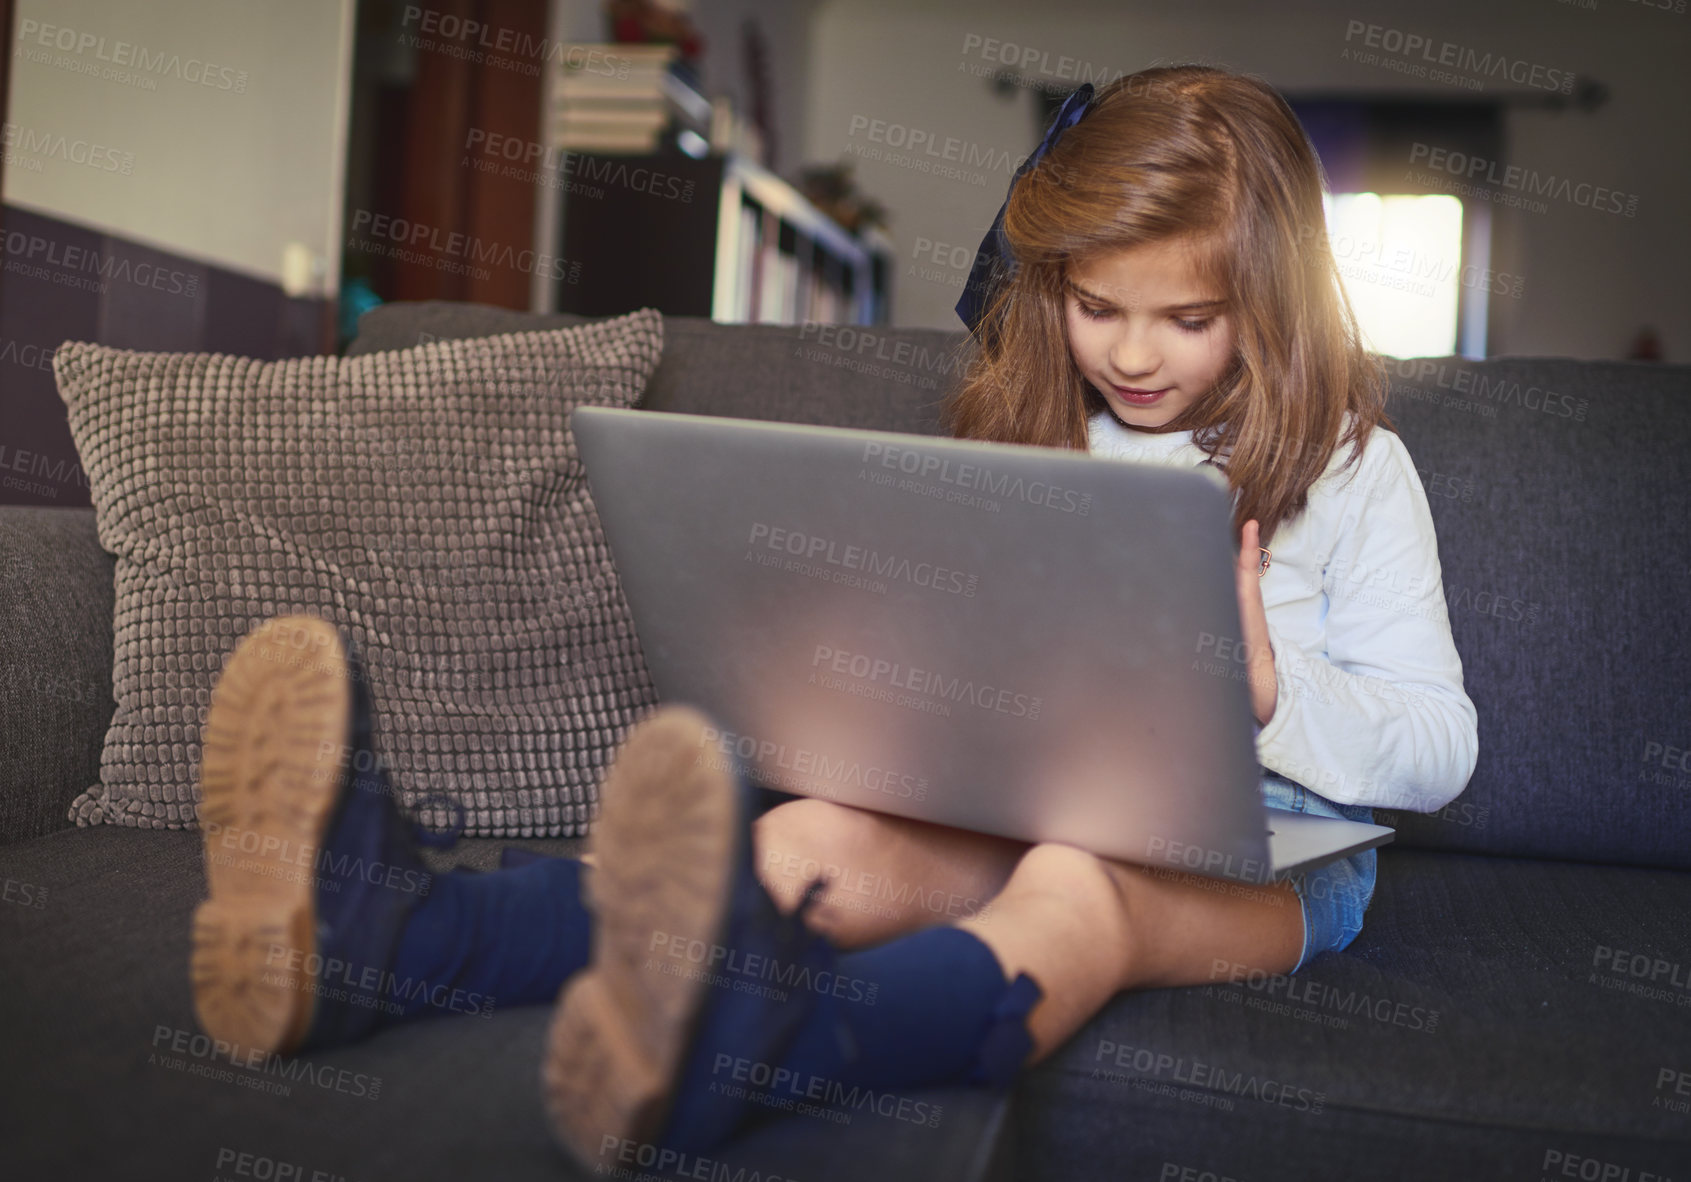 Buy stock photo Shot of adorable little kids using wireless technology at home